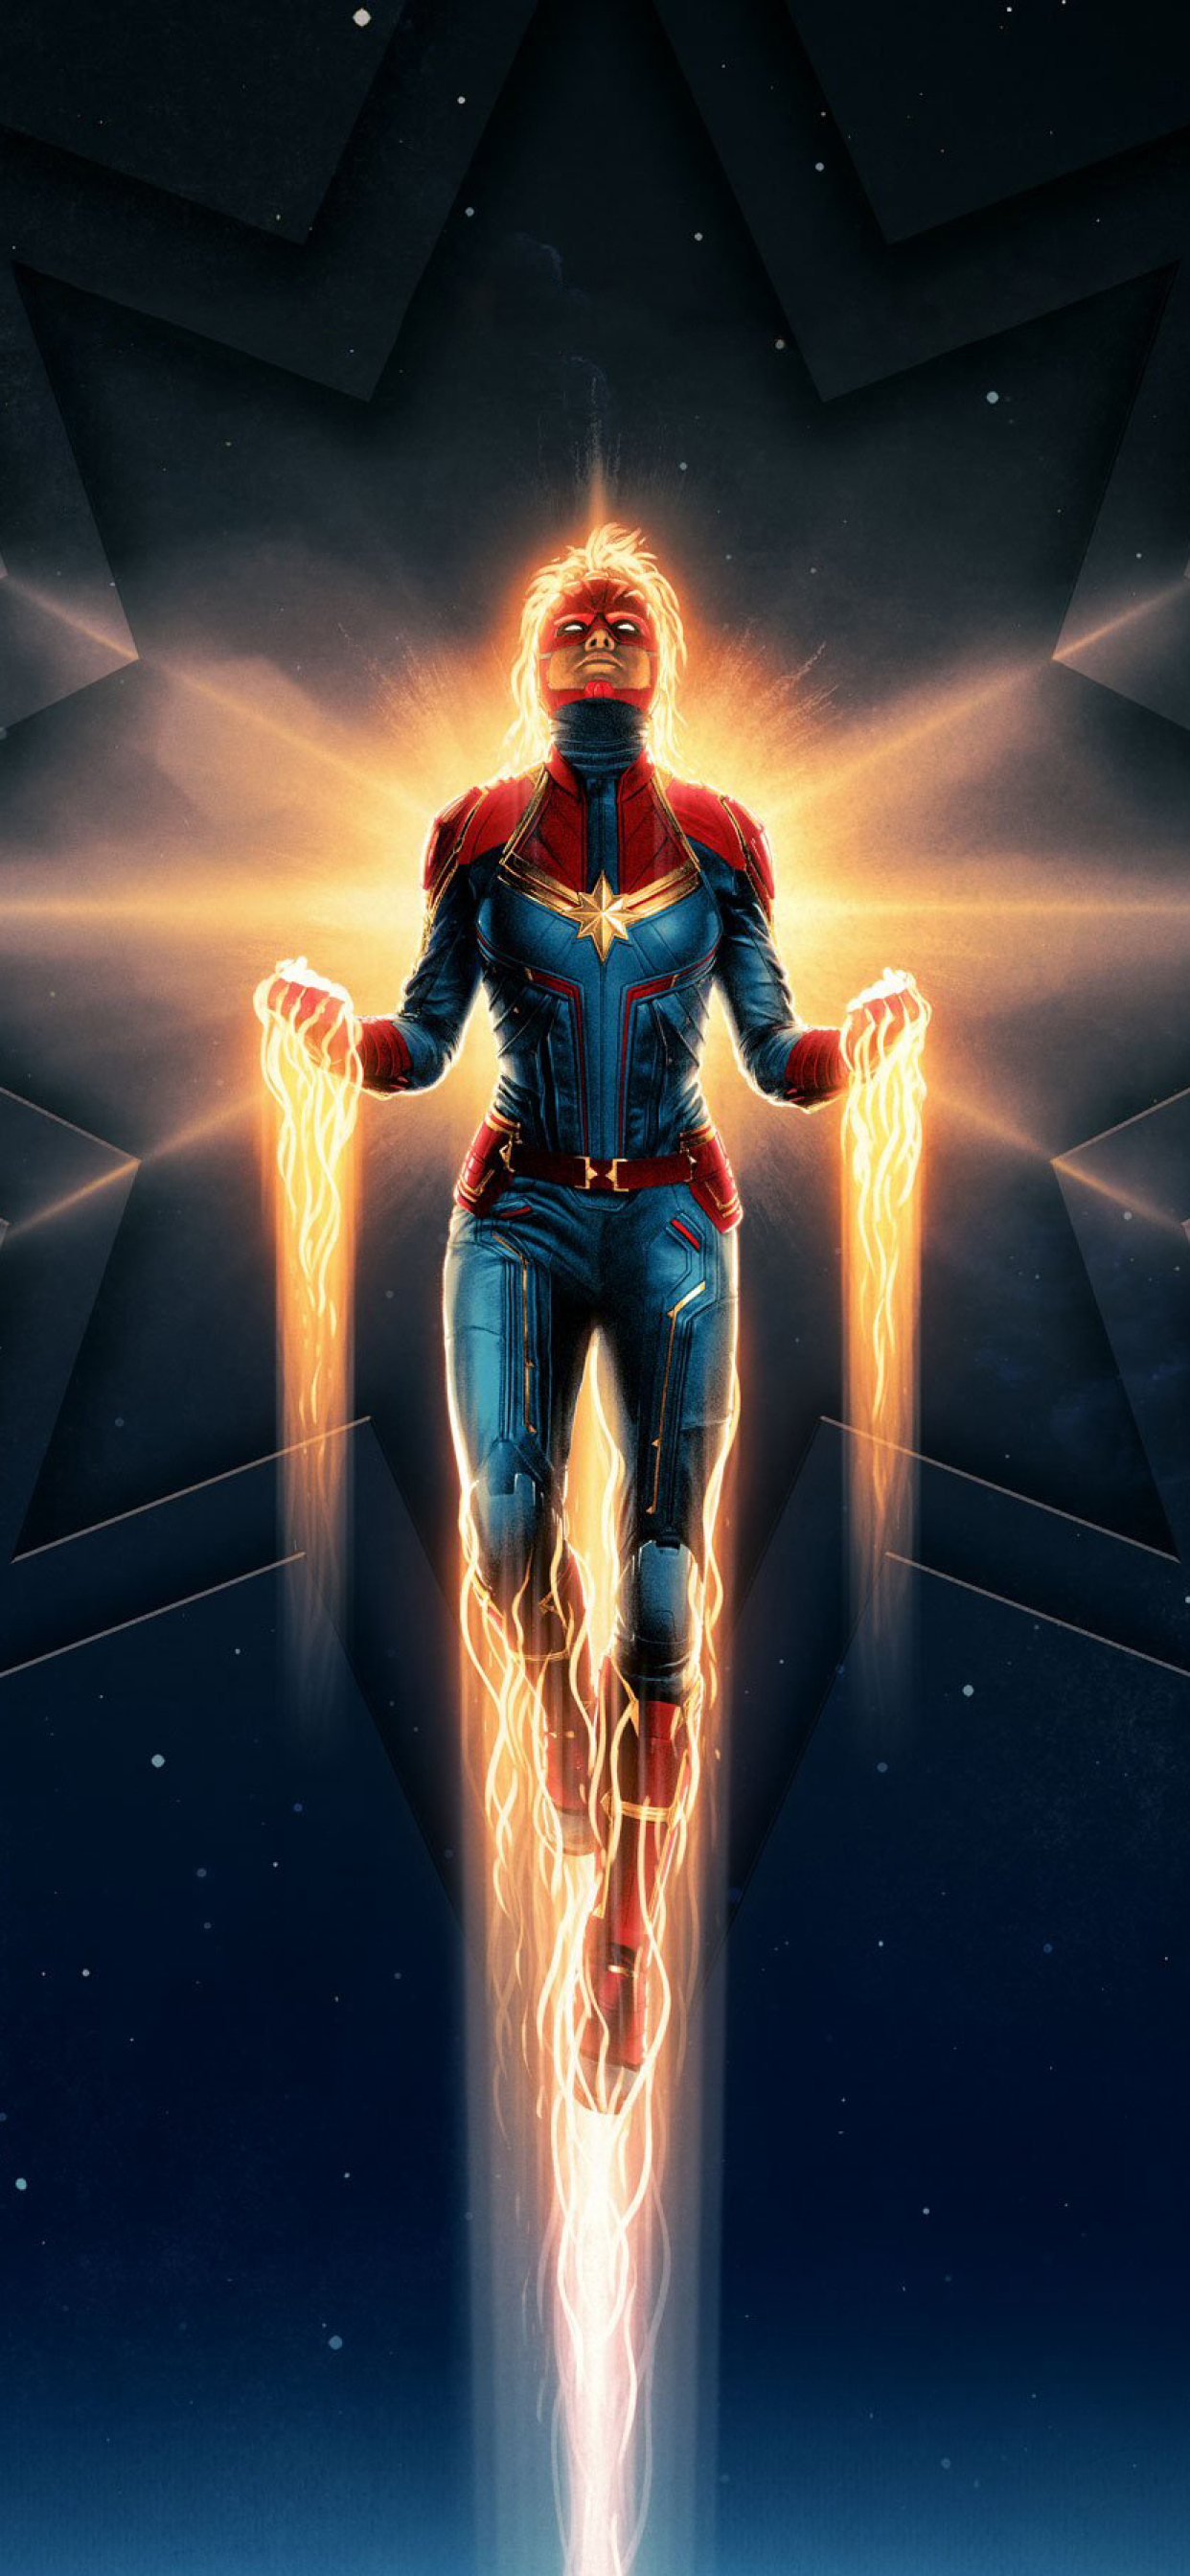 1242x26 Captain Marvel Movie 19 Iphone Xs Max Wallpaper Hd Movies 4k Wallpapers Images Photos And Background